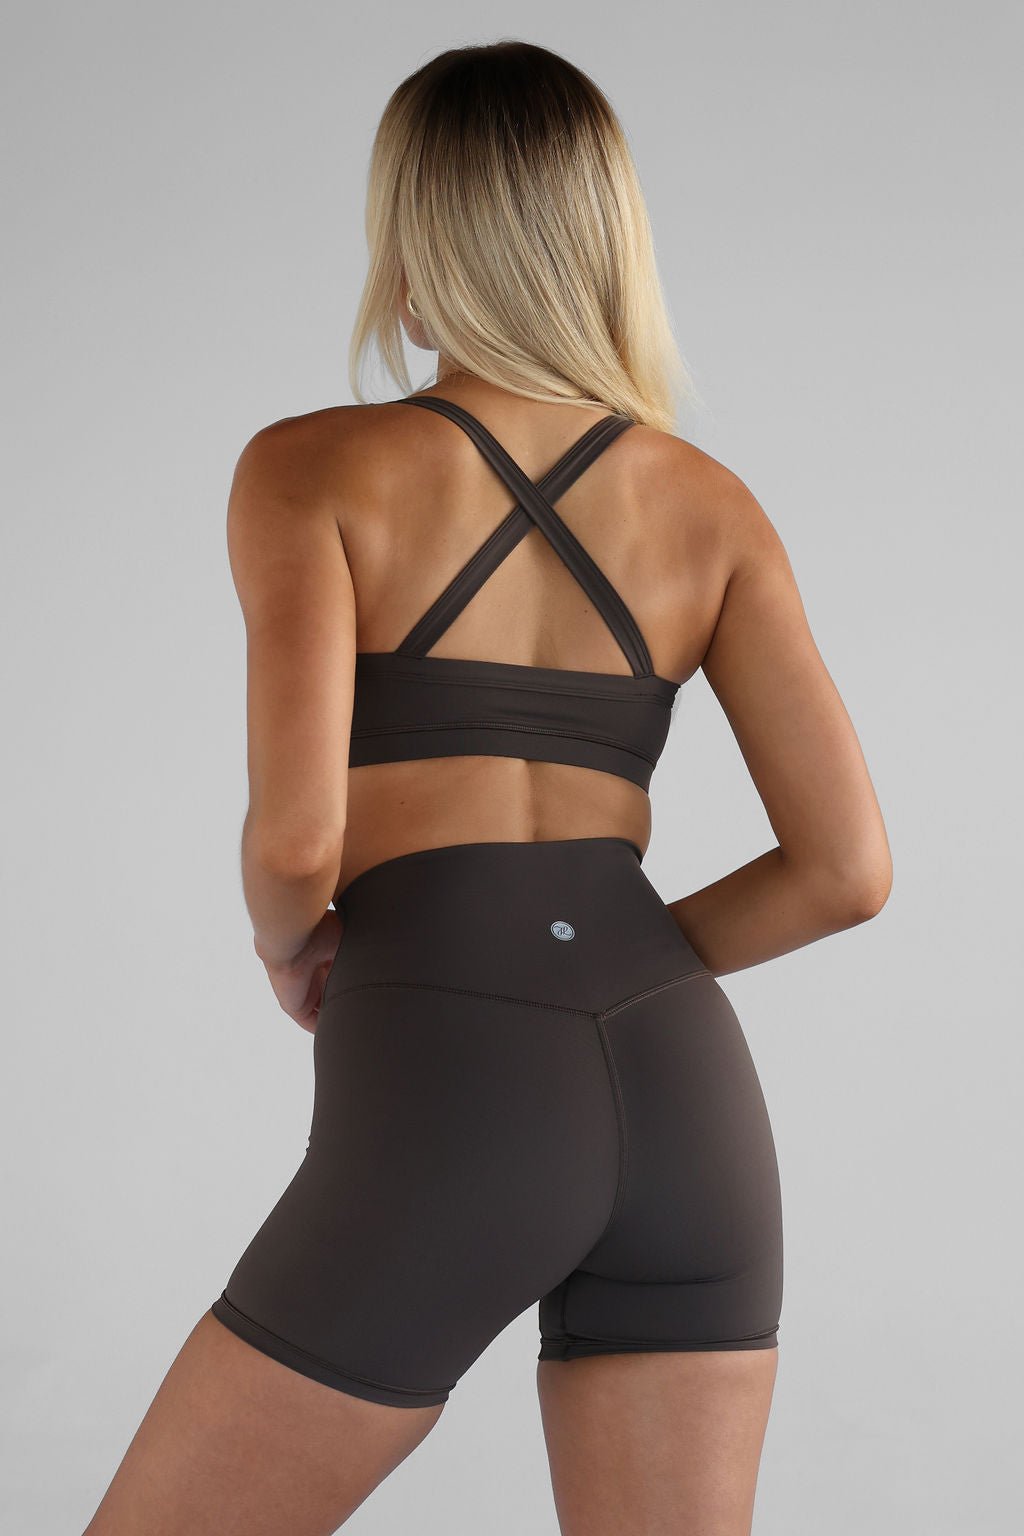 SCULPT Cross Back Crop - Dark Chocolate SHIPPING FROM 12/02 - LEELO ACTIVE